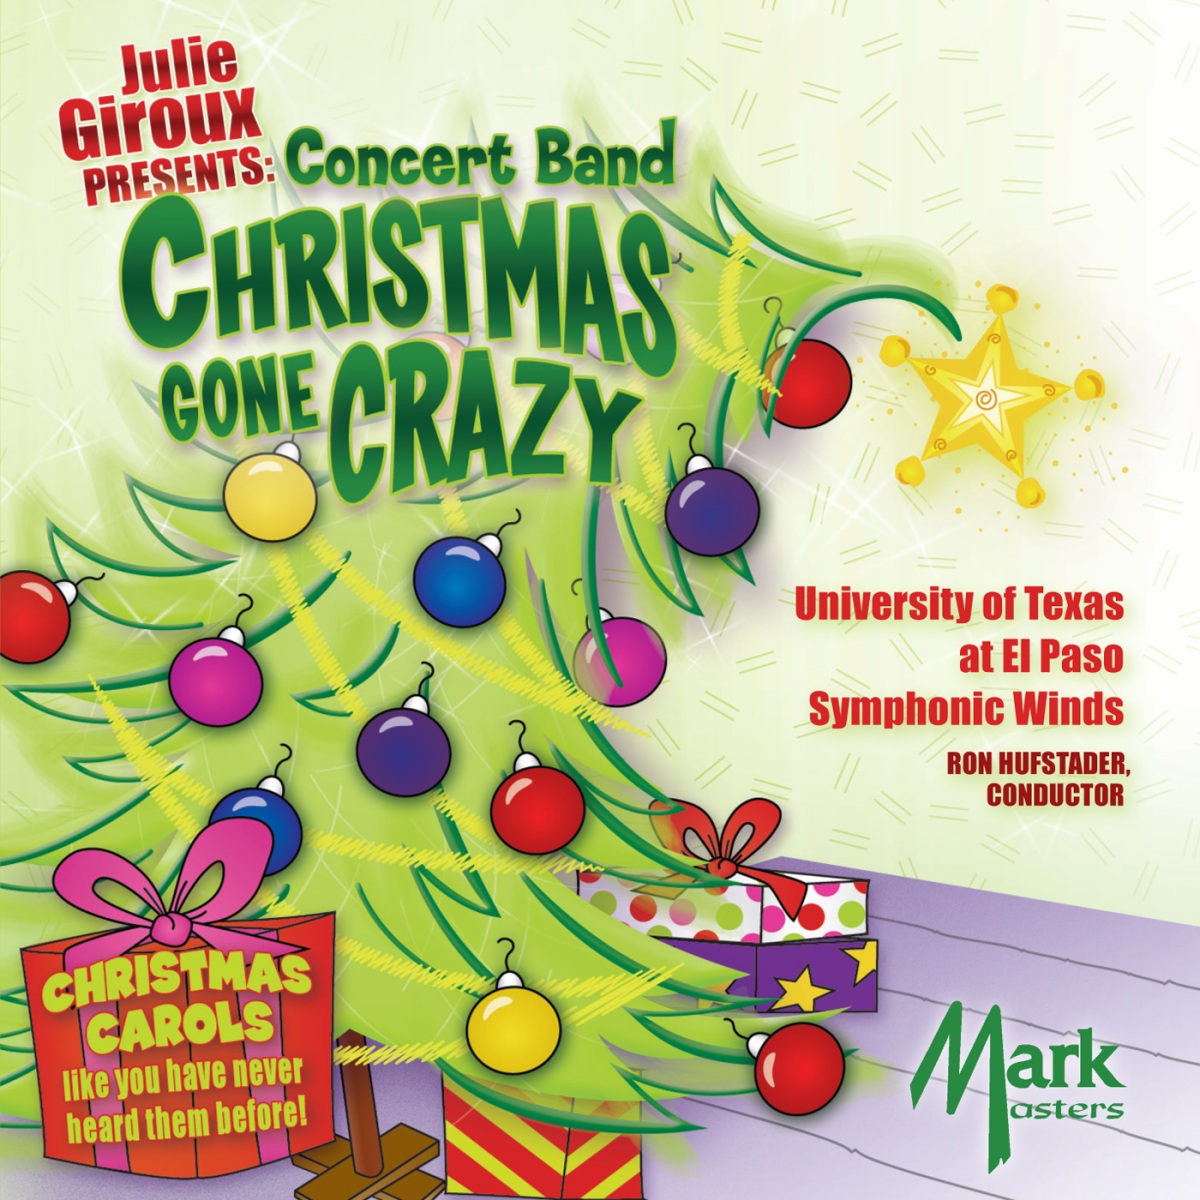 Julie Giroux Presents: Concert Band Christmas Gone Crazy - click here